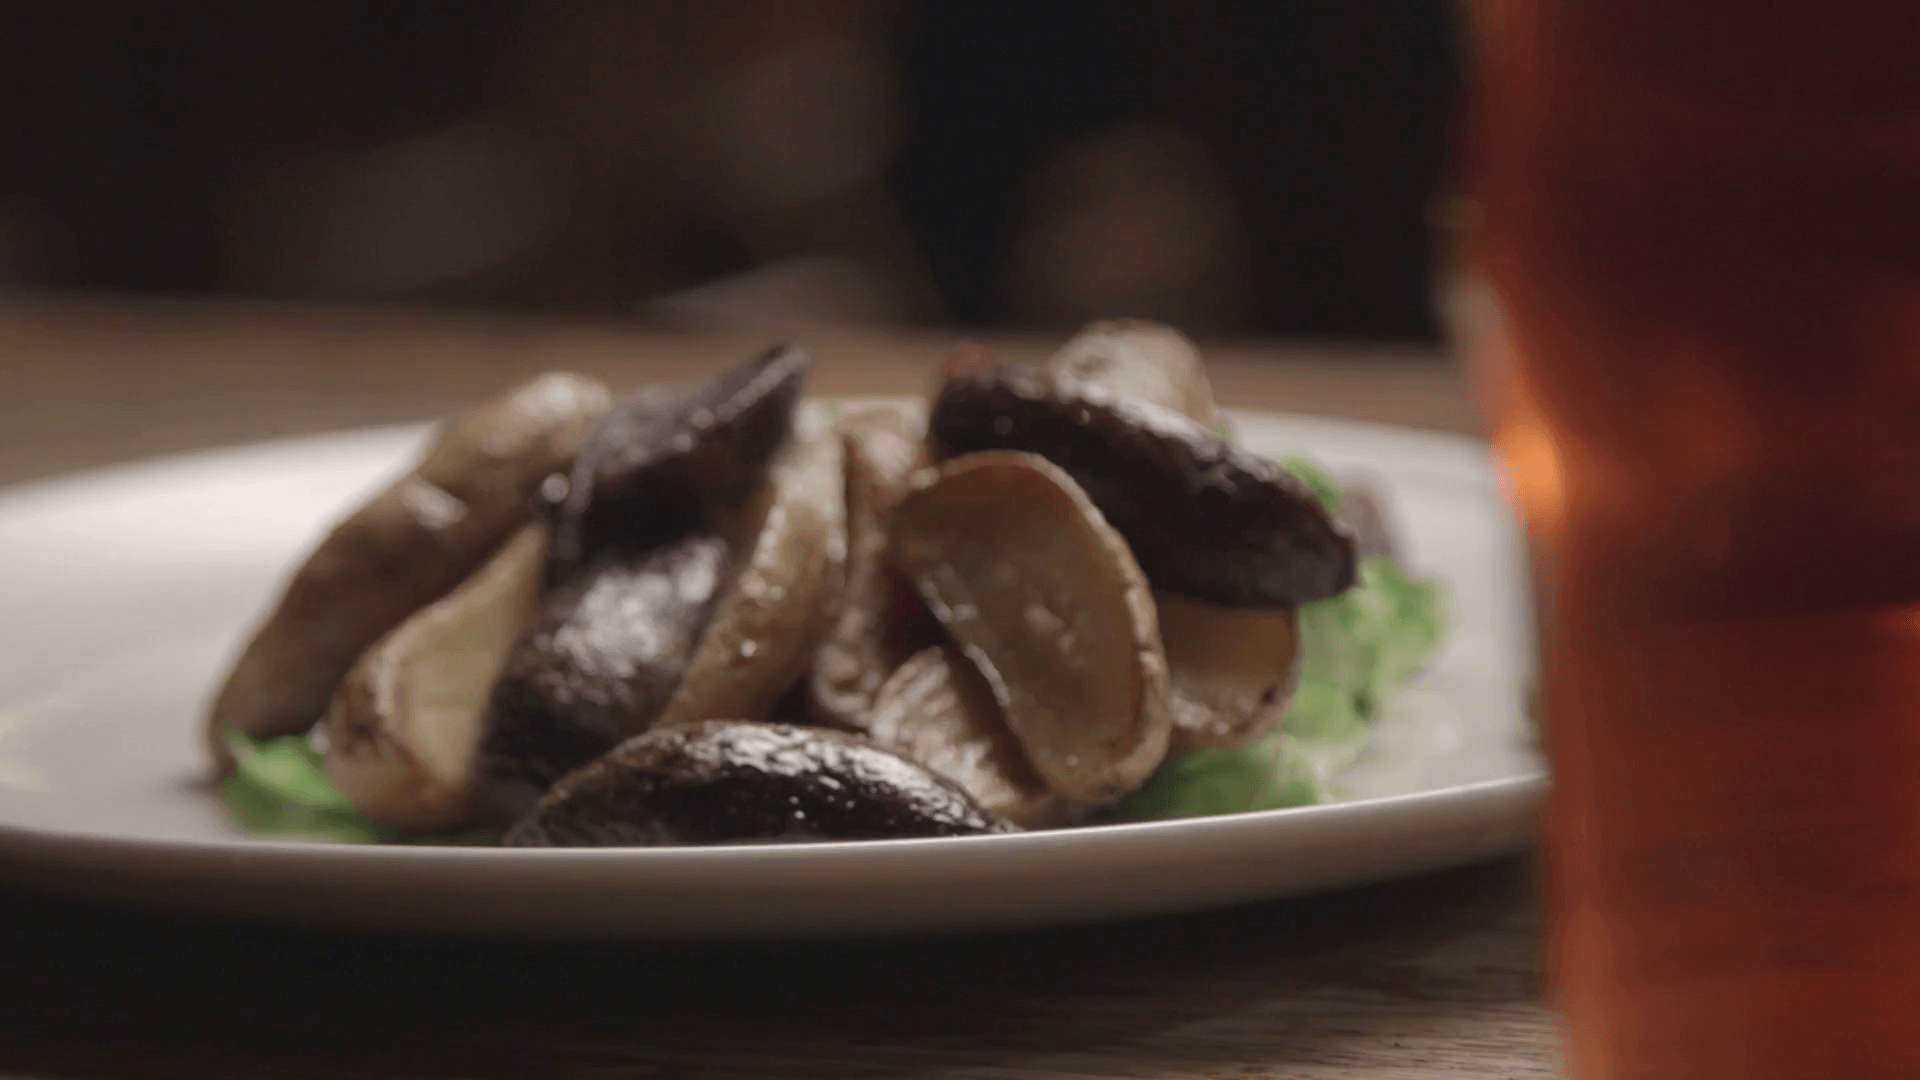 Delicious food and beer plated on rustic setting. Stock Video Footage